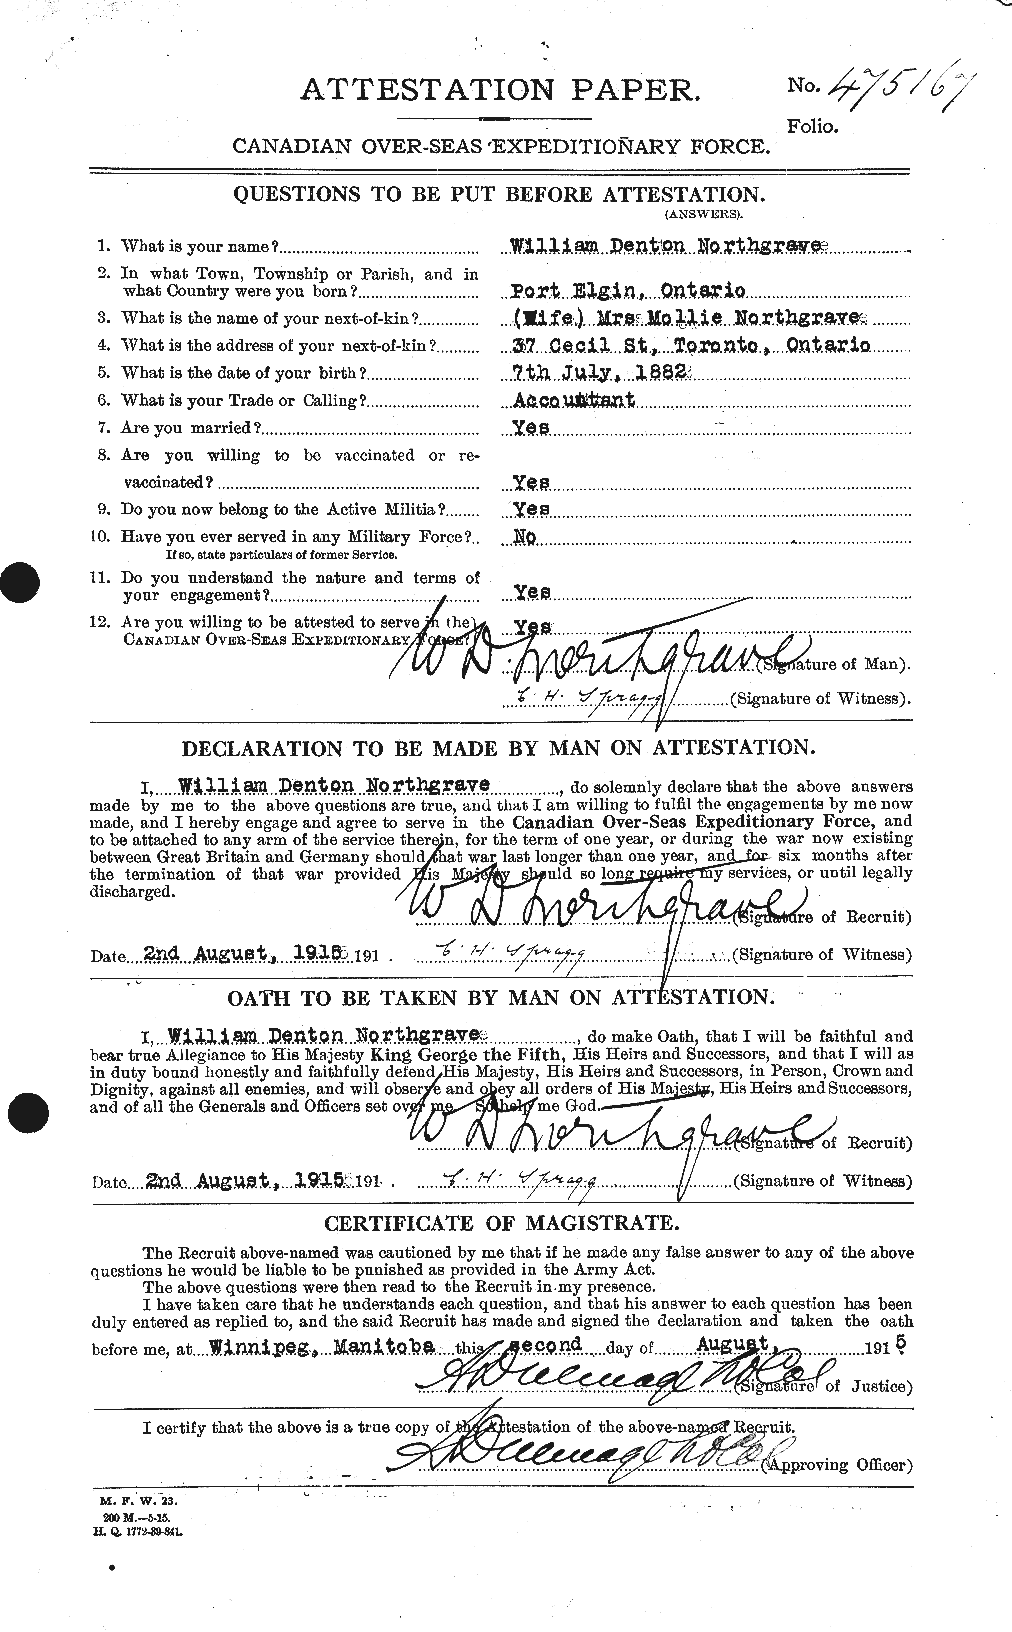 Personnel Records of the First World War - CEF 551687a